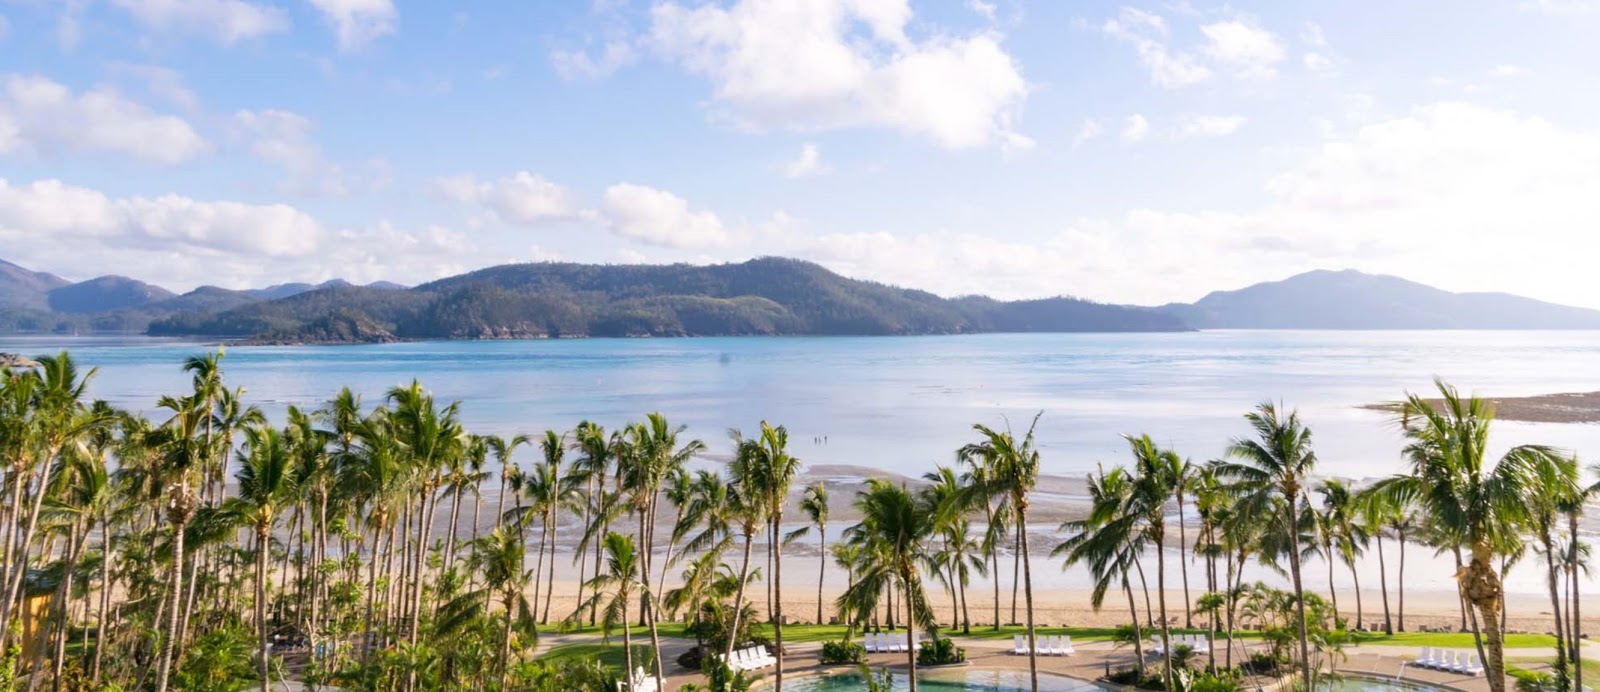 Top 7 Tips For Your Visit To Hamilton Island